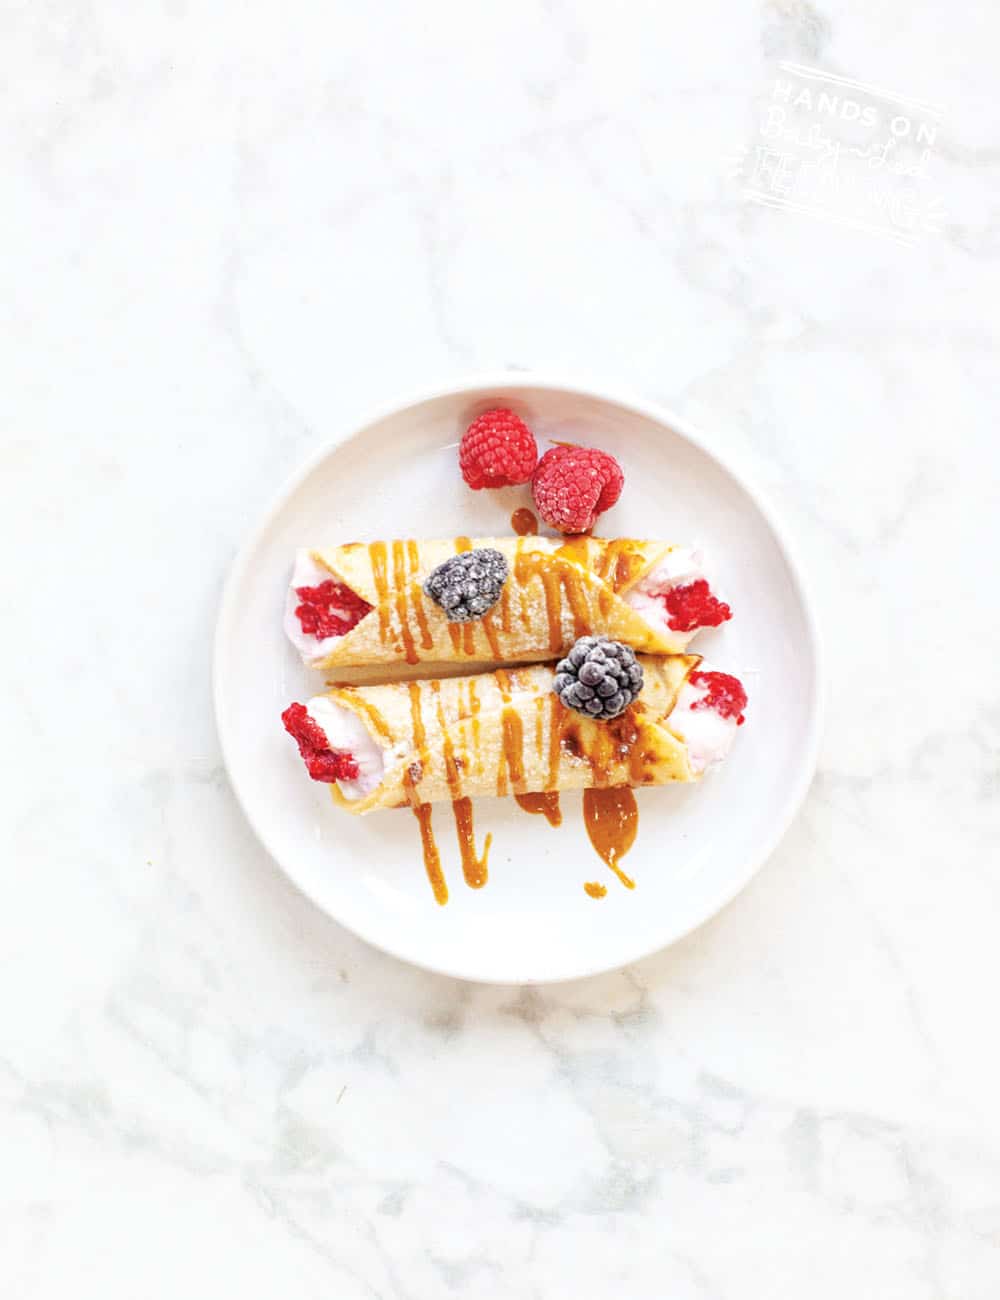 Ideas for baby breakfast! Pancake Tuesday Berry Yoghurt Baby Crepes! Sweetened naturally with fruit and wrapped in a SUPER easy crepe recipe with only 3 ingredients! Refined sugar-free breakfast or treat for babies. #babyledfeeding #babyledweaning #babybreakfast #babybreakfastideas #crepes #pancaketuesday